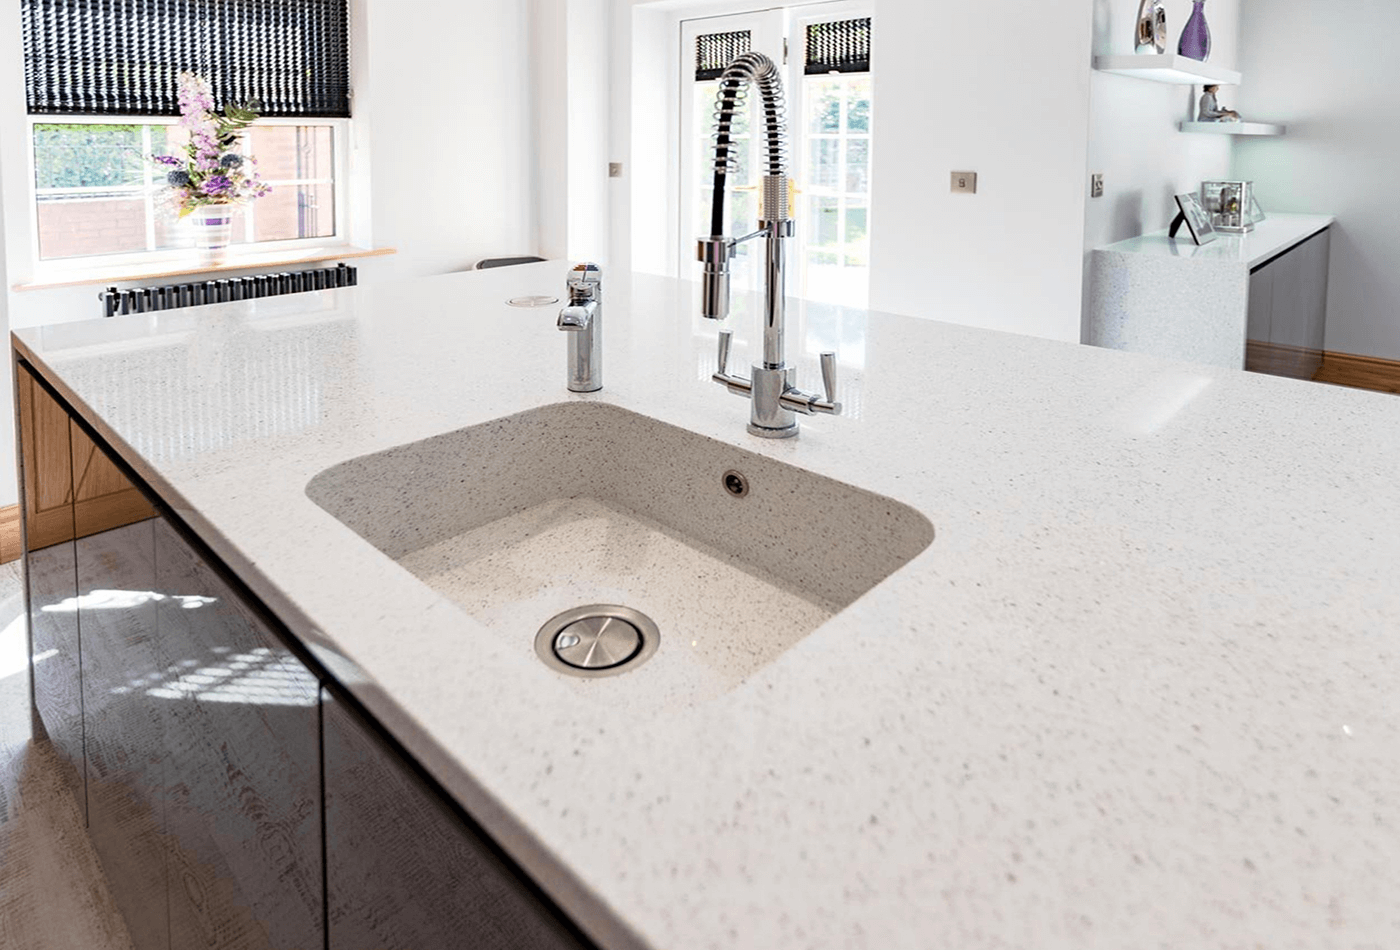 List Down the Thickness and Size of these Silestone Kitchen Surfaces